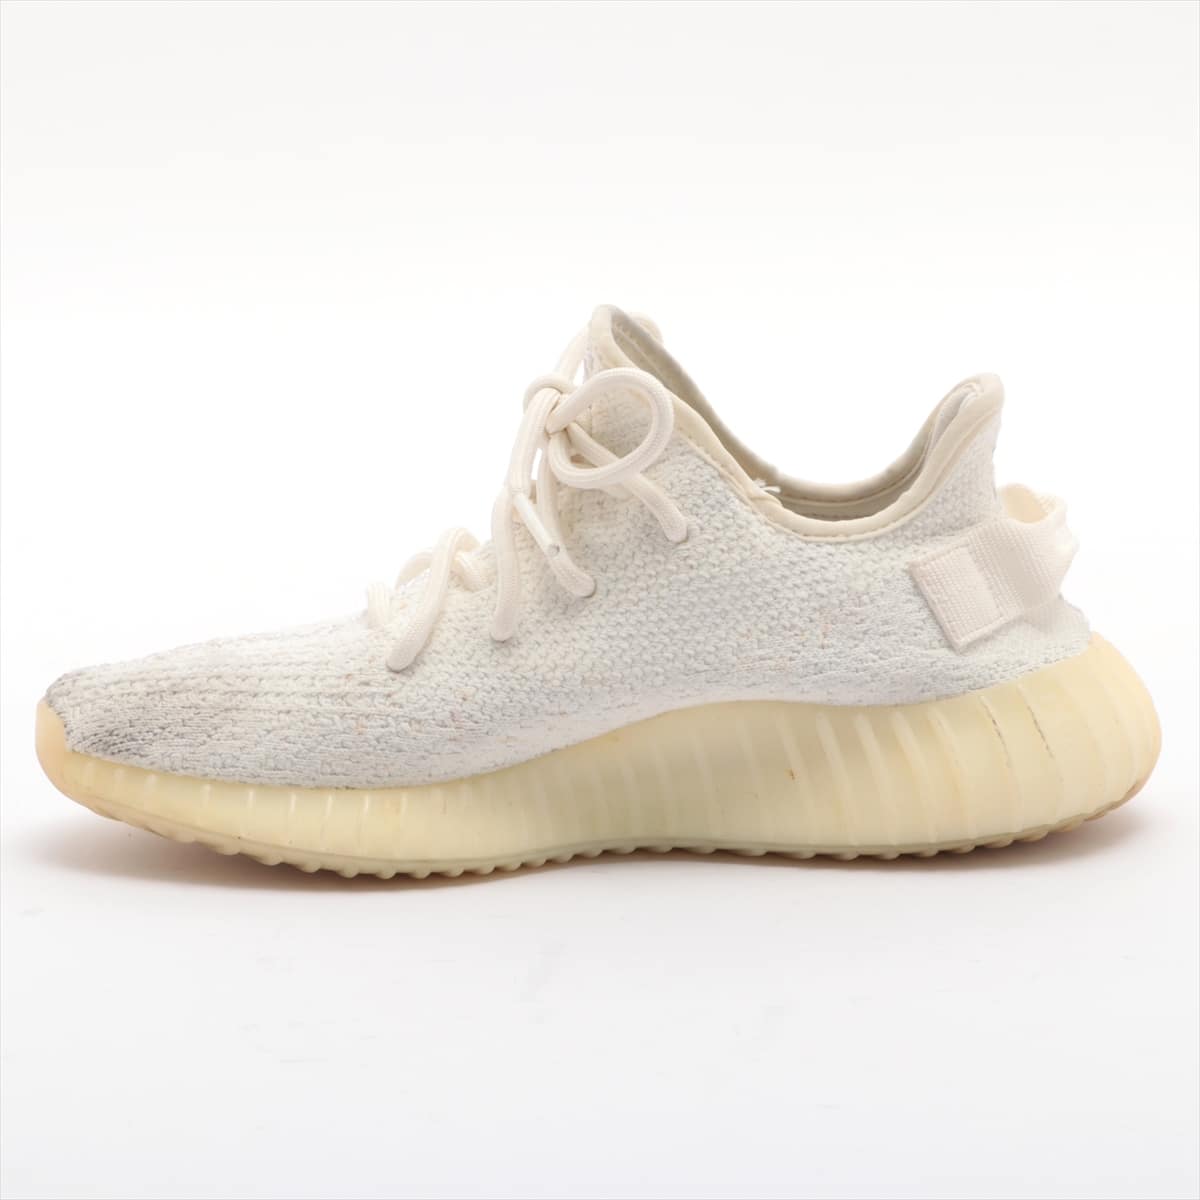 Adidas YEEZY BOOST 350 V2 Knit Sneakers 24cm Ladies' White CP9366